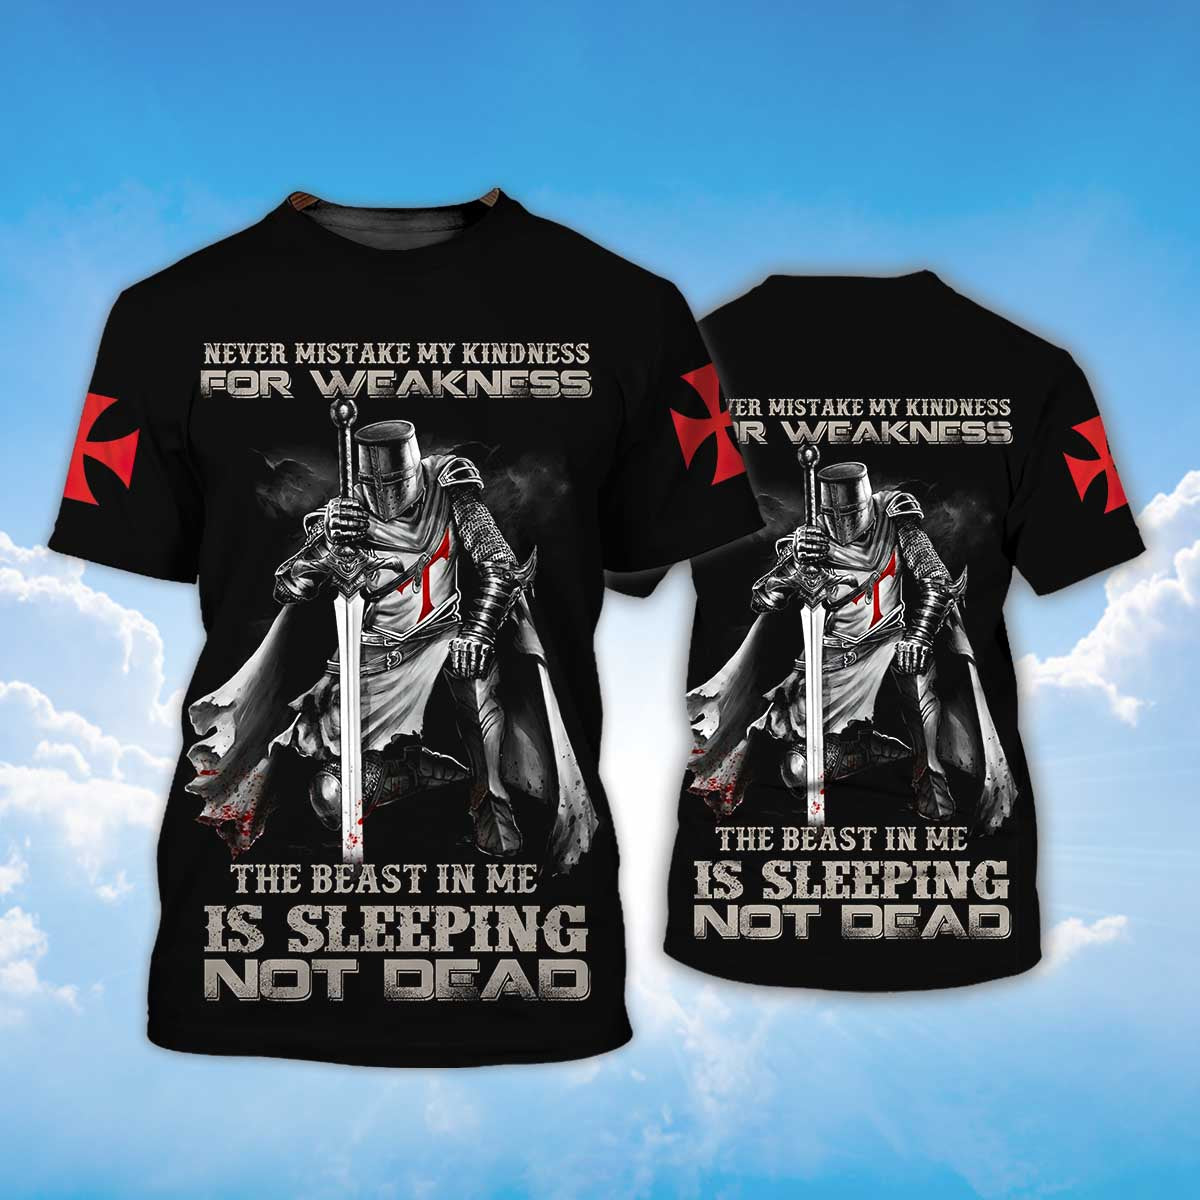 3D All Over Print Black Knights Templar Shirt The Beast In Me Is Sleeping Not Dead T Shirt